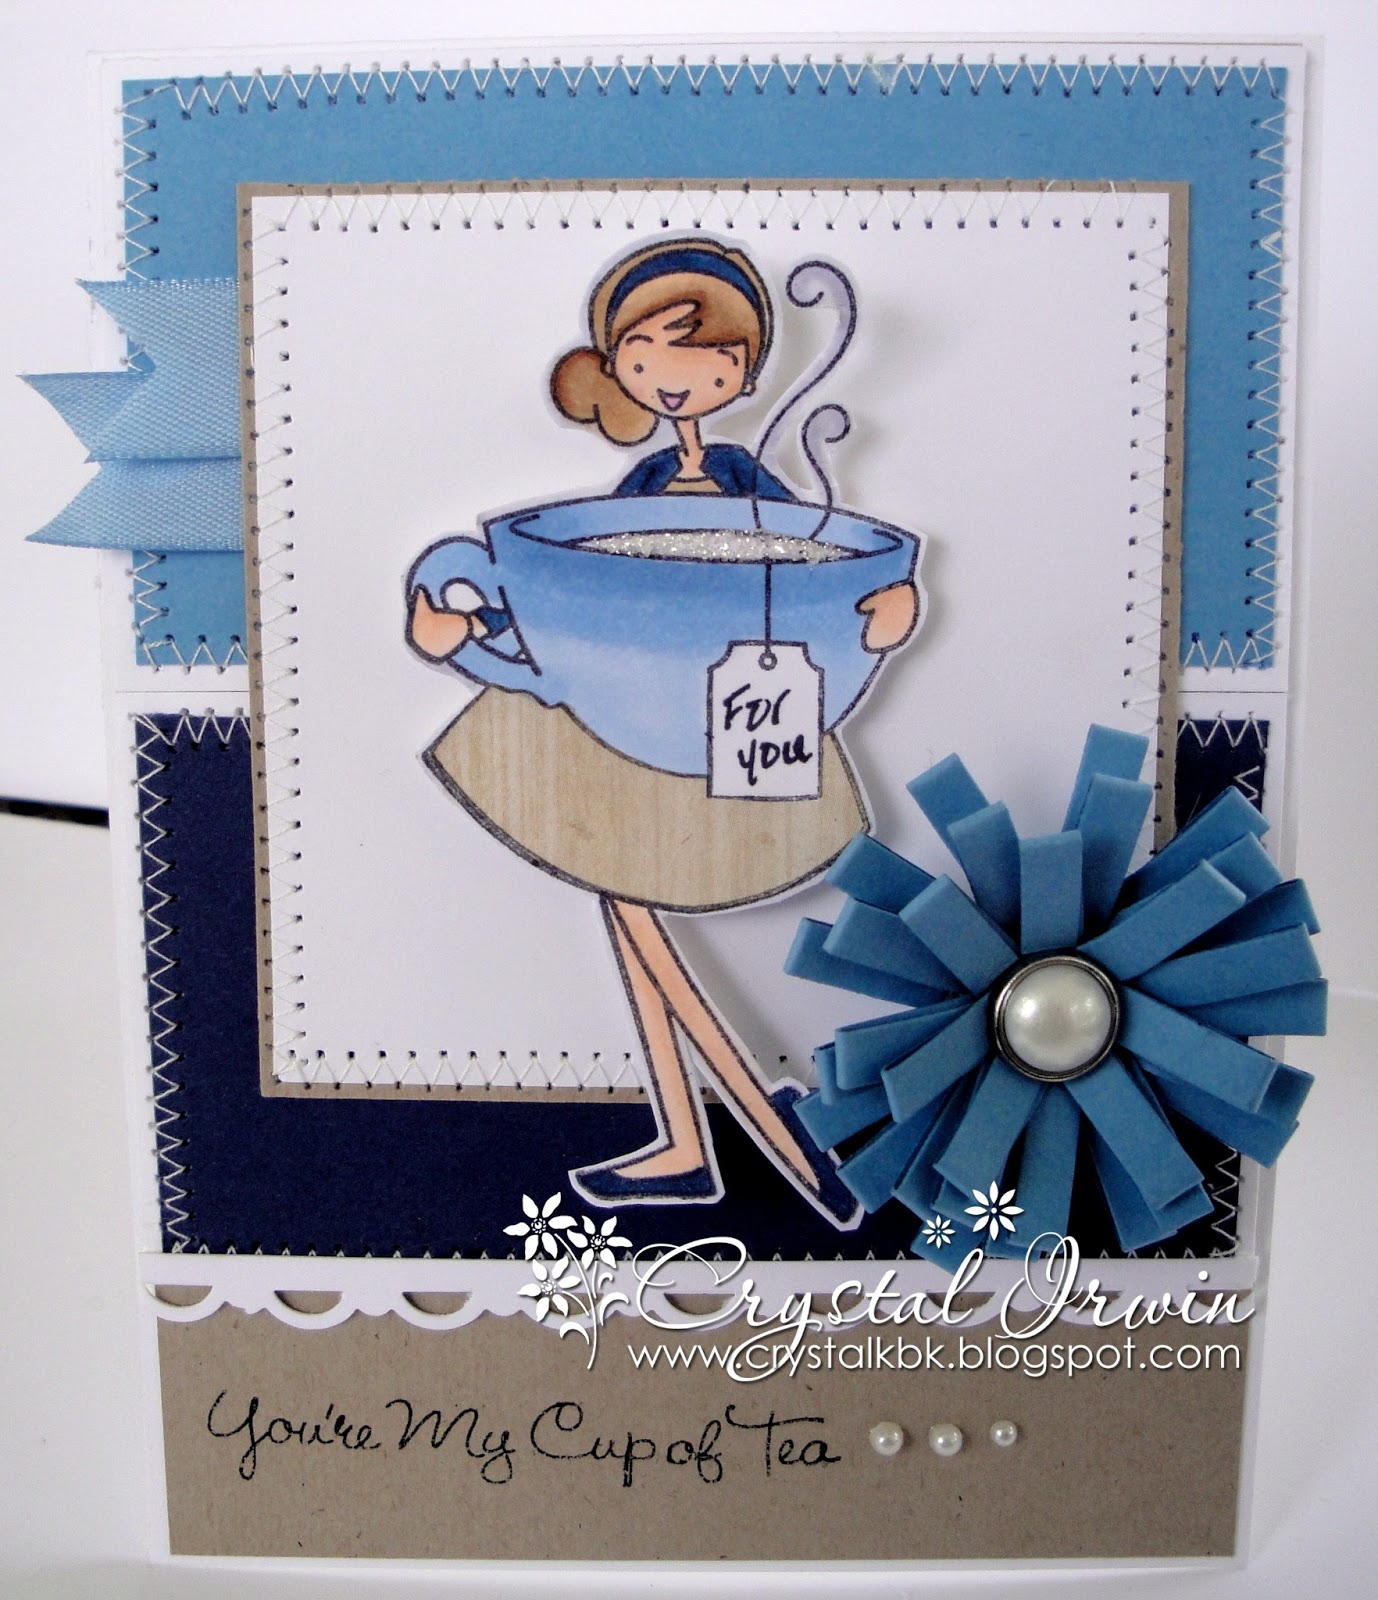 Crystal's Crafty Creations: Your my cup of Tea!